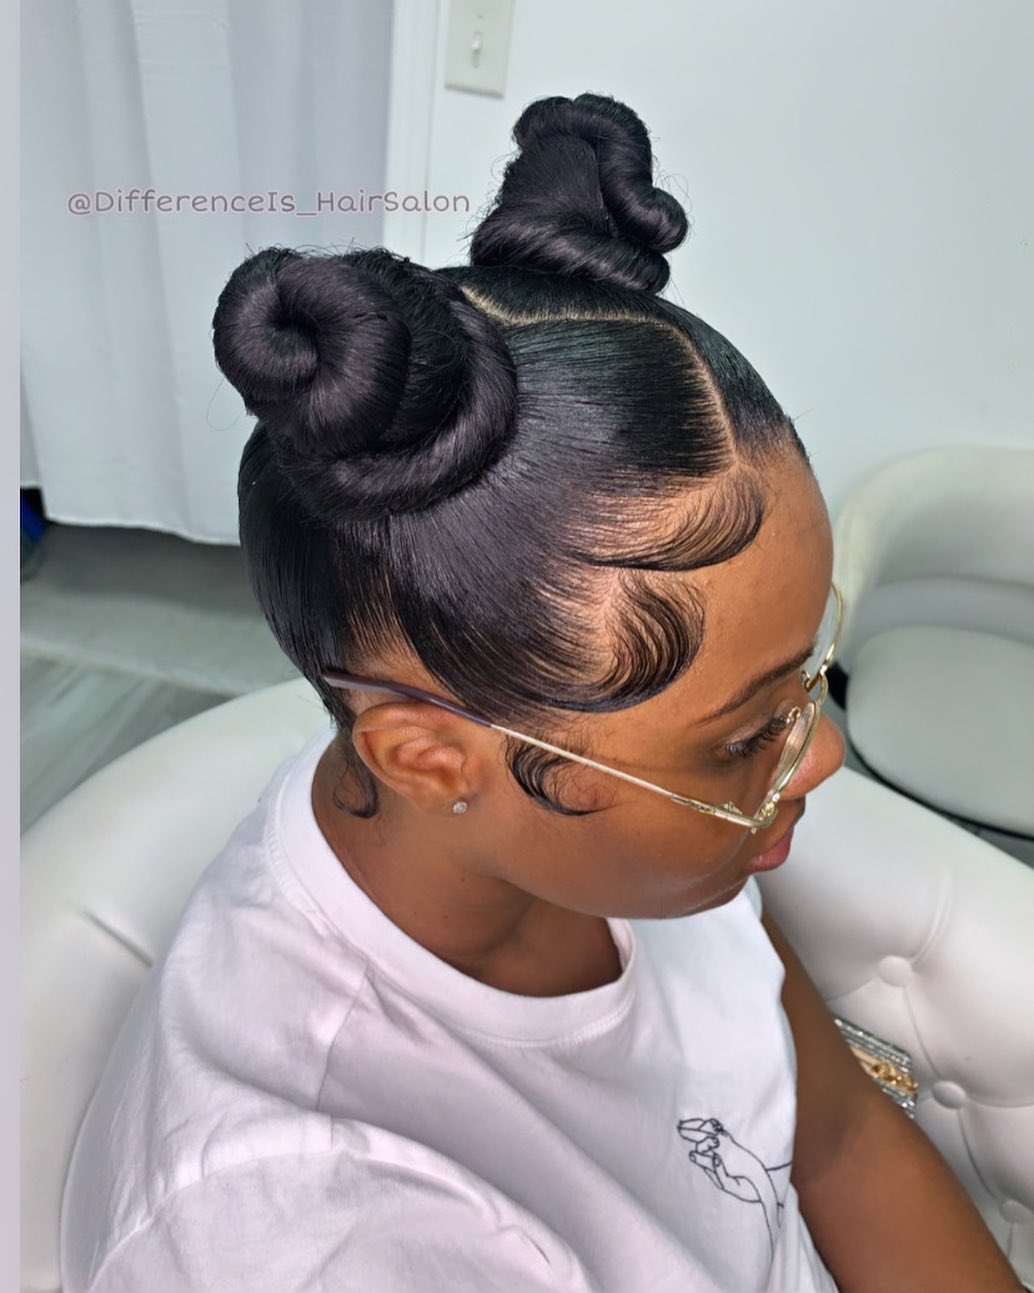 Black hairstyles double knotted ninja buns for women NHP Approved